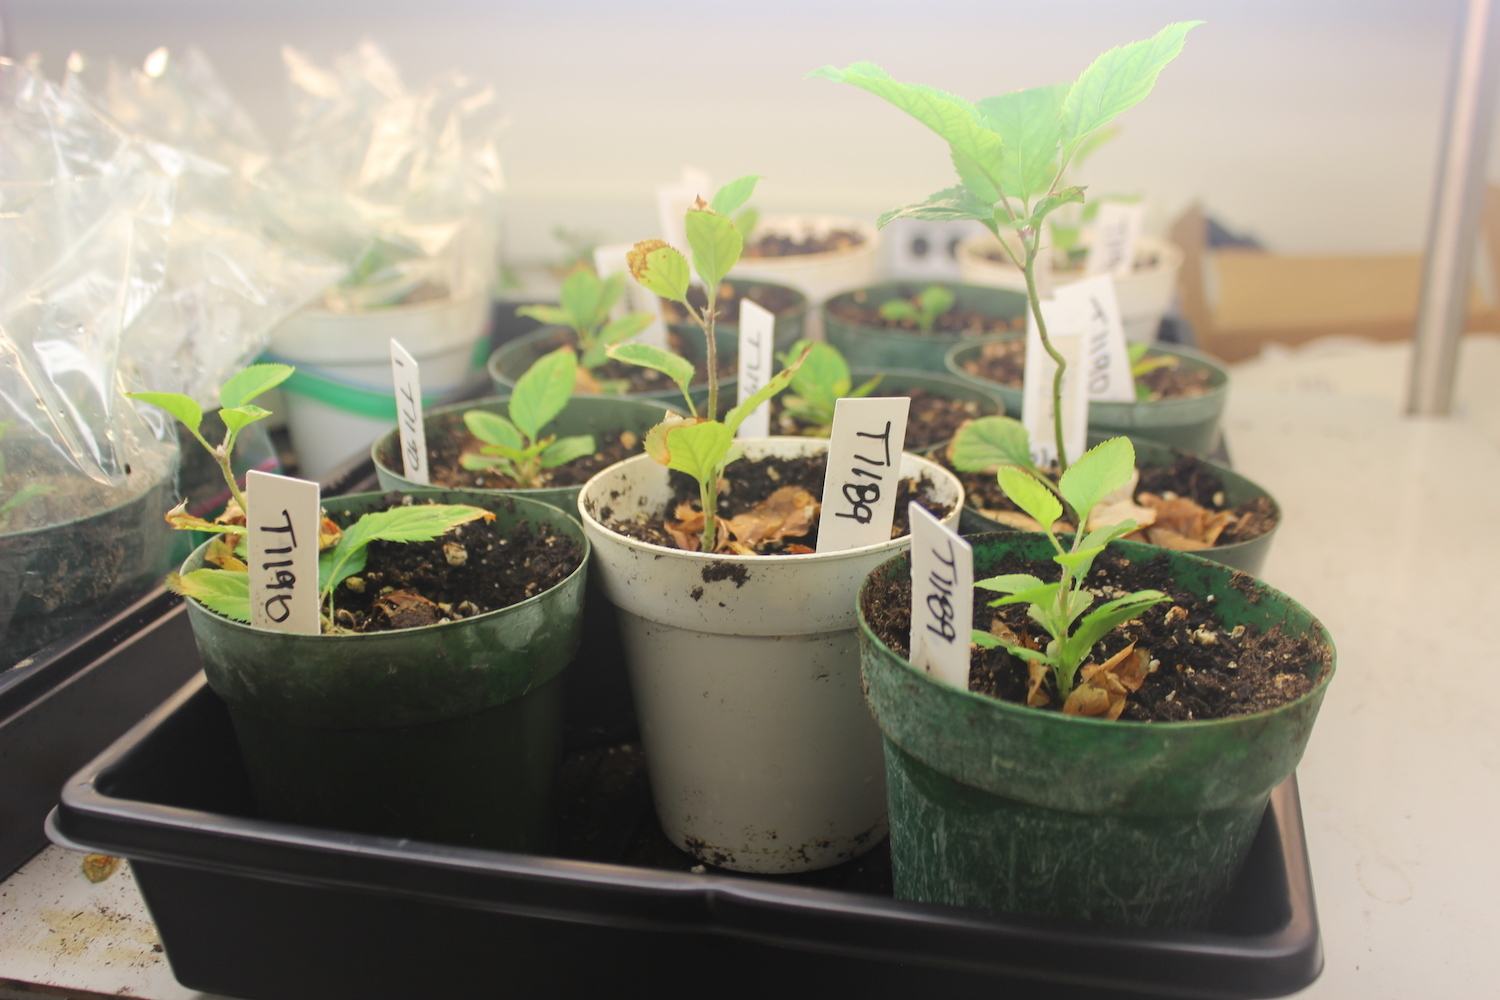 T1190 seedlings growing in Khan's lab at Cornell AgriTech.